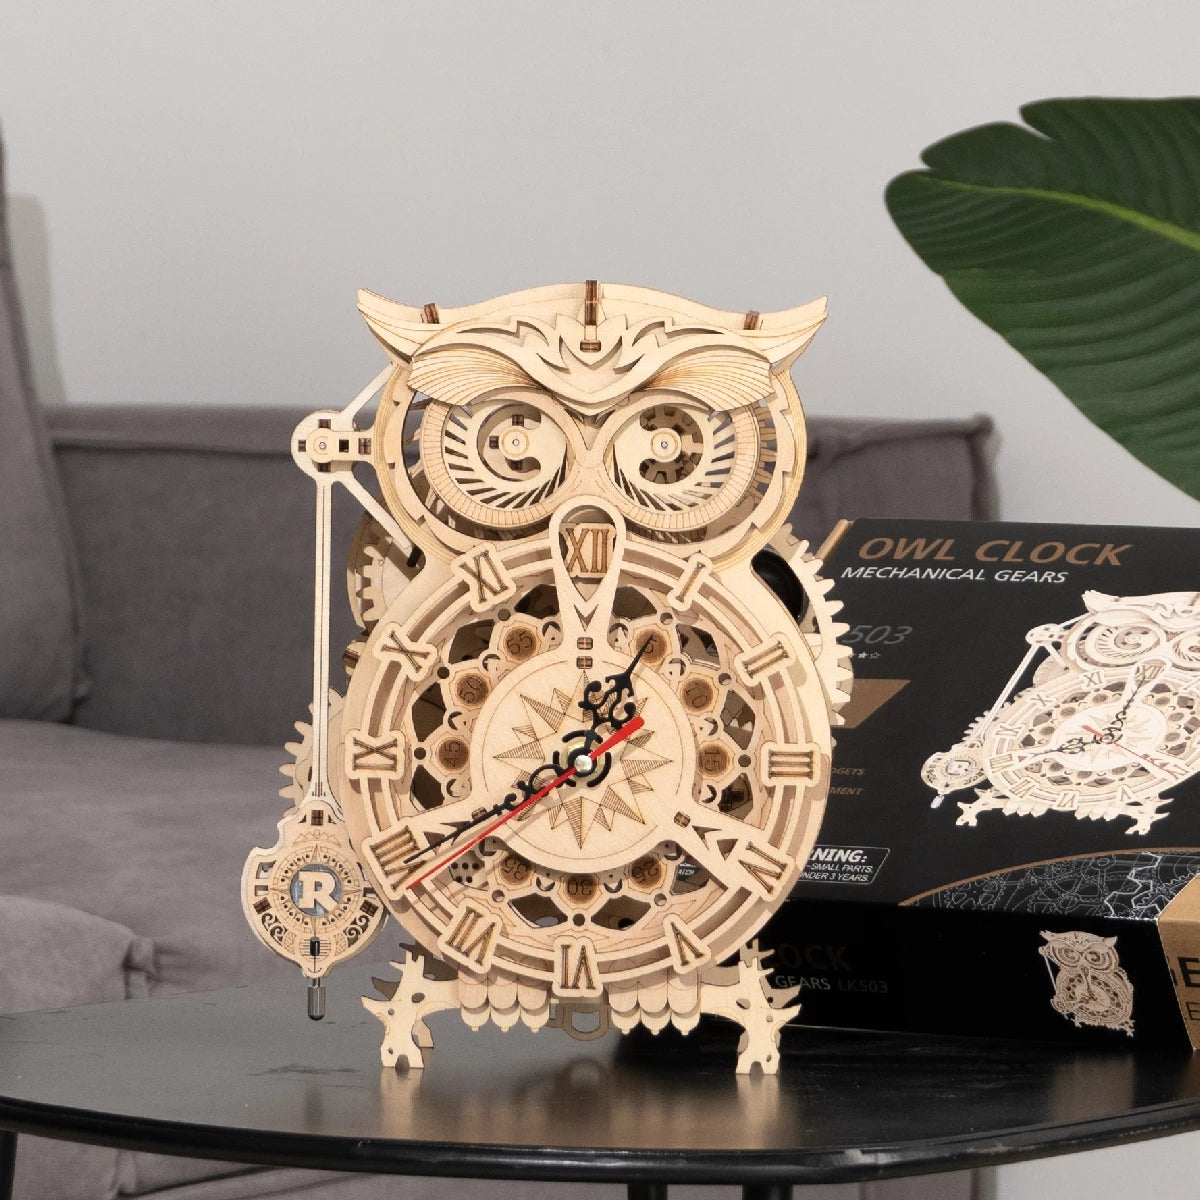 Robotime Rokr Creative DIY Toys 3D Owl Wooden Clock Building Block Kits For Children Christmas Gifts Home Decoration LK503 - TryKid